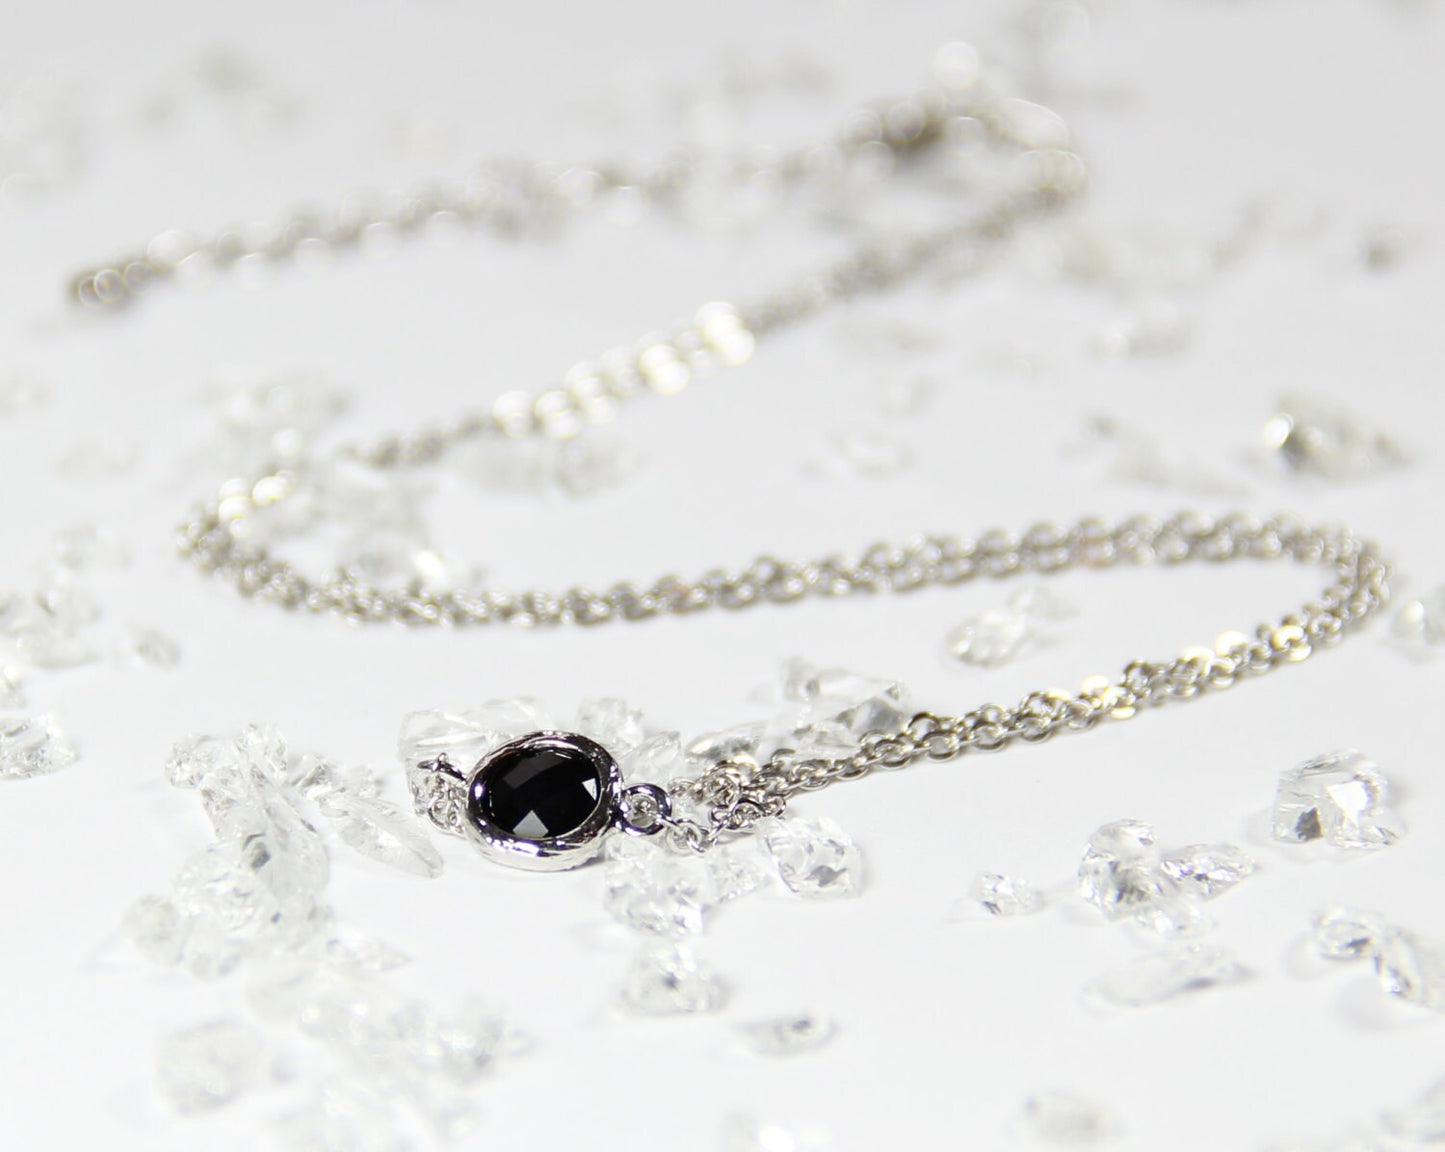 Black Stone and Silver Stacking Necklace - BridesMaid Gift - Gemstone Necklace